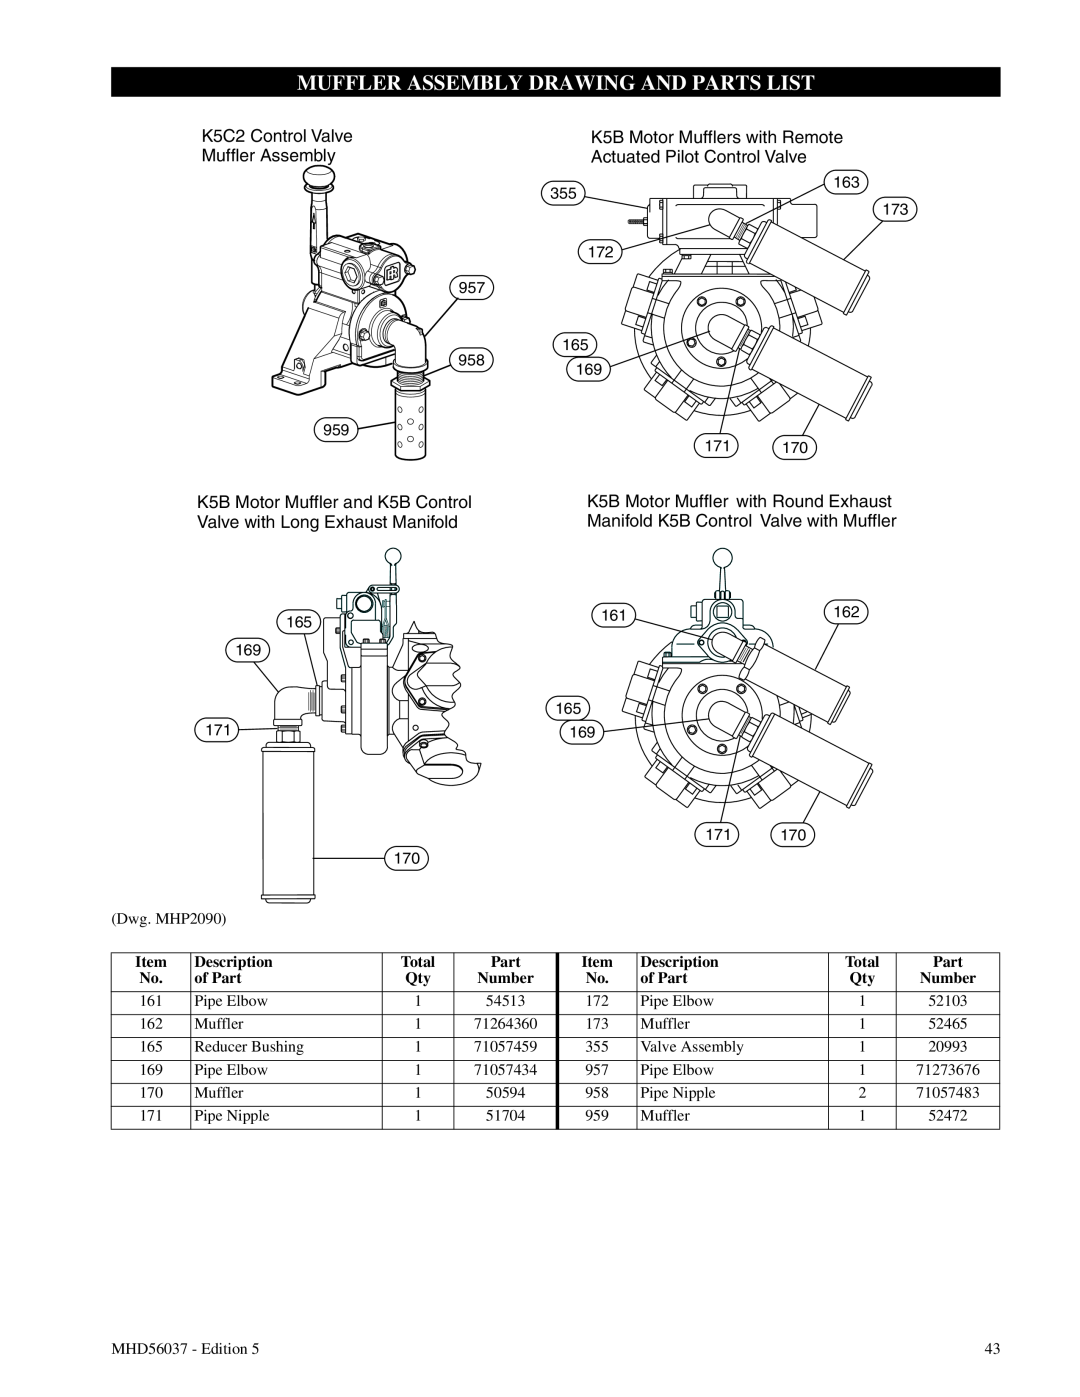 Ingersoll-Rand FA5T manual Muffler Assembly Drawing And Parts List 